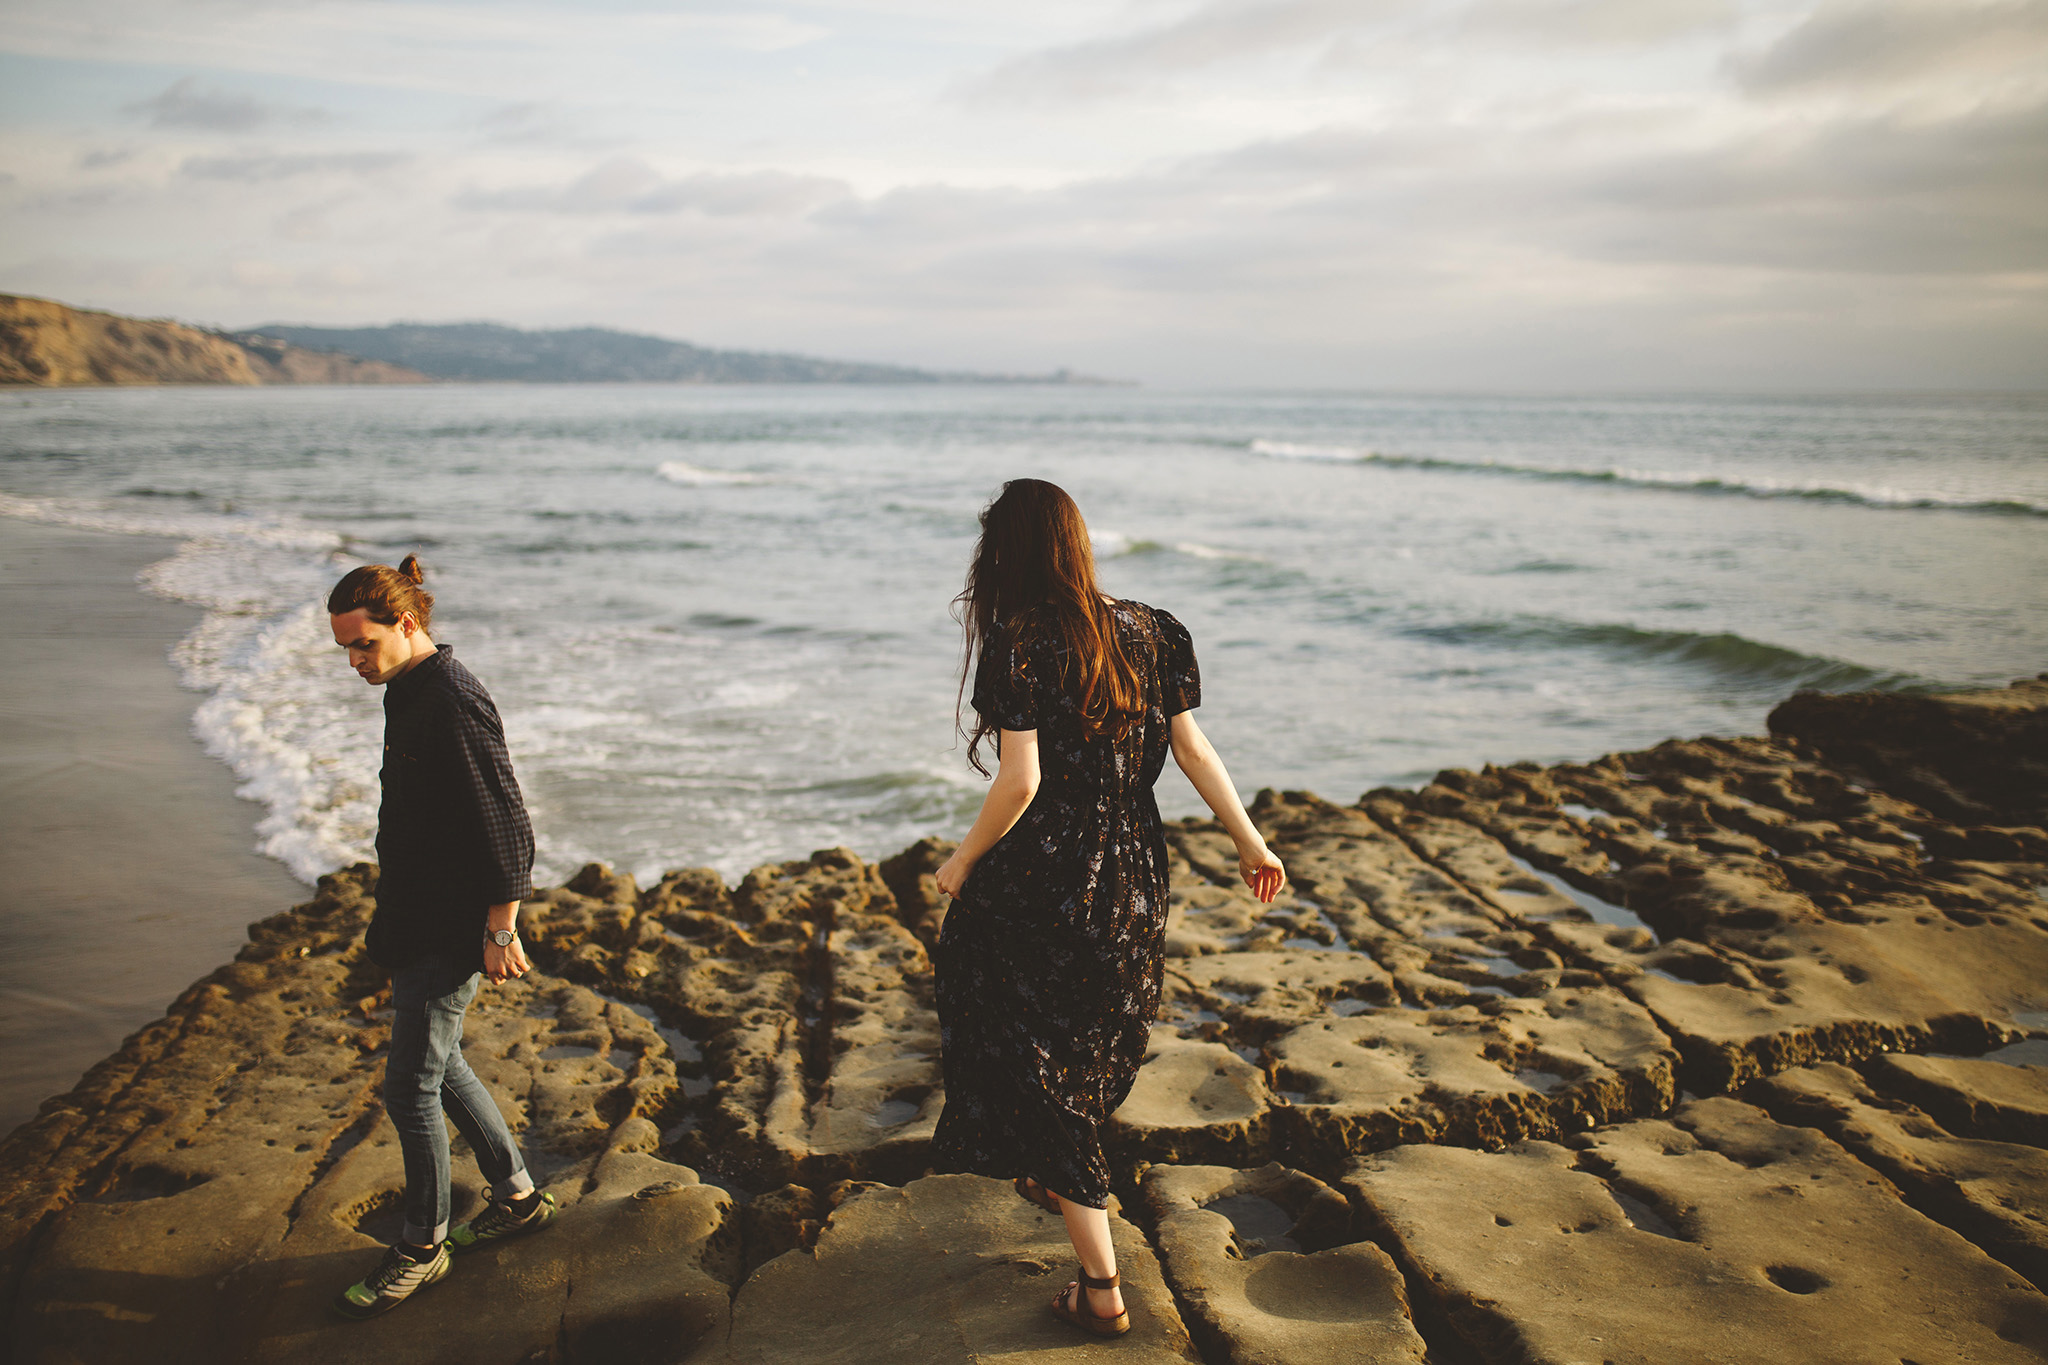 Los Angeles maternity photographer at the beach